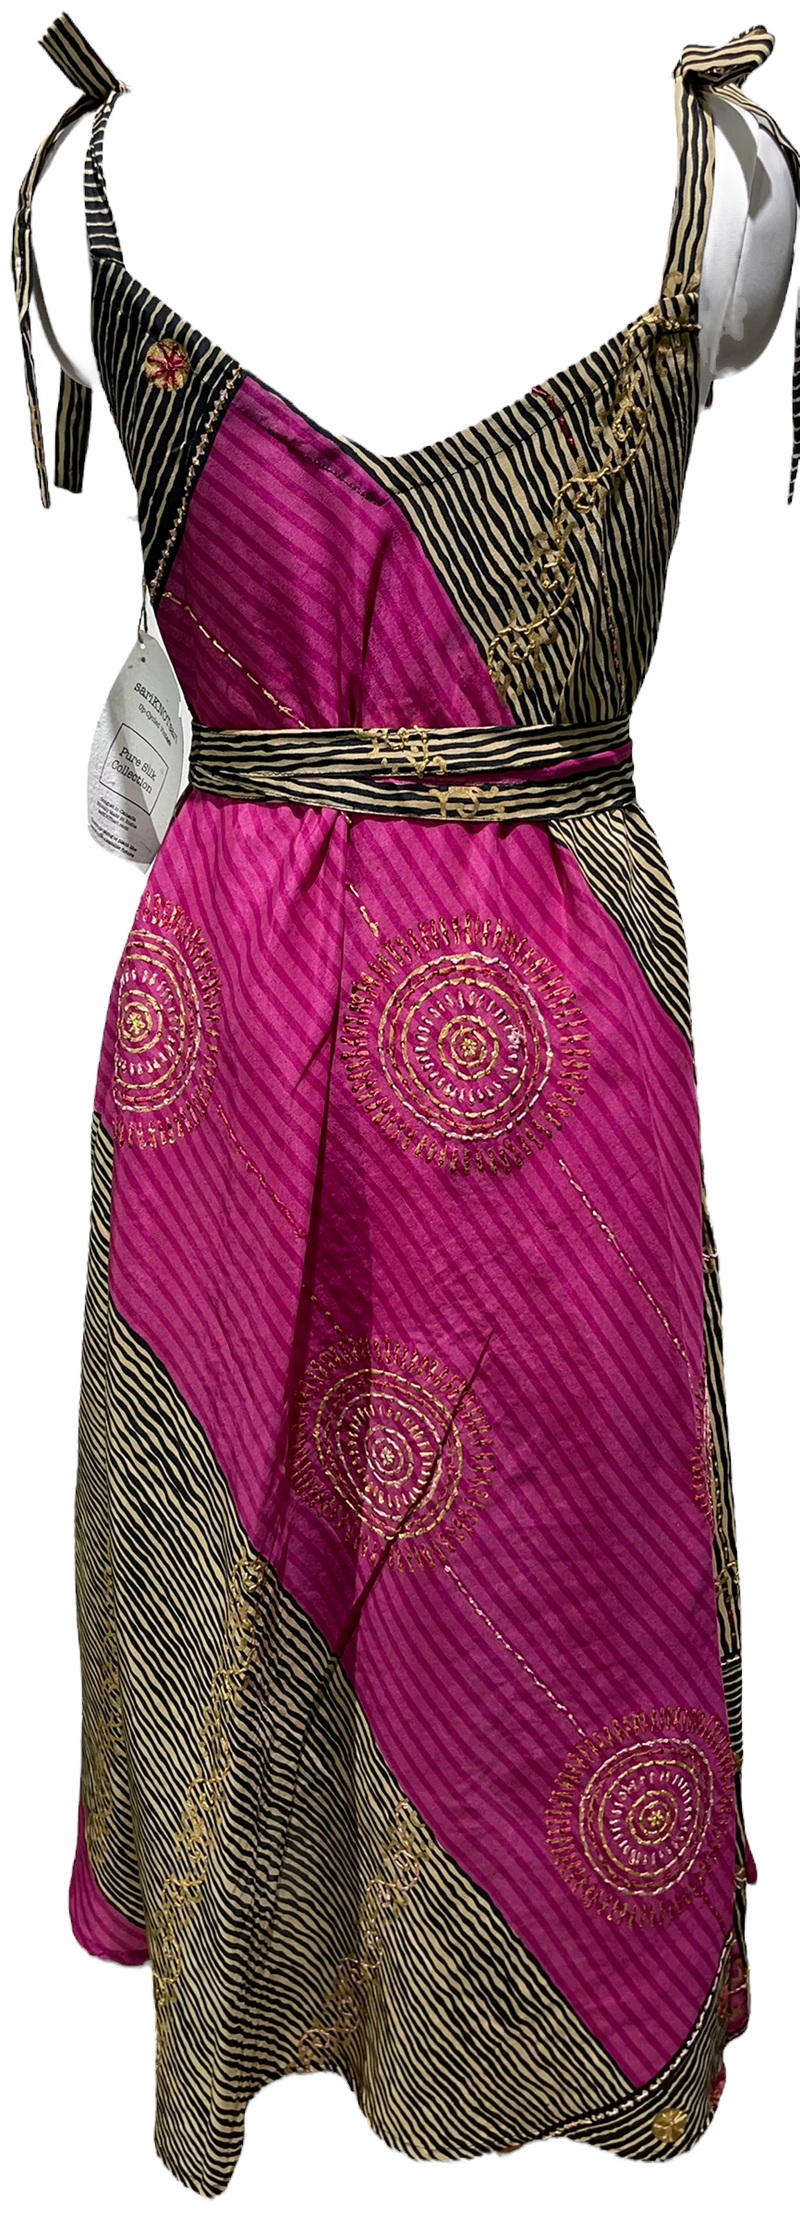 PRC2166 Chapin's Apalis Pure Silk Maxi Dress with Belt